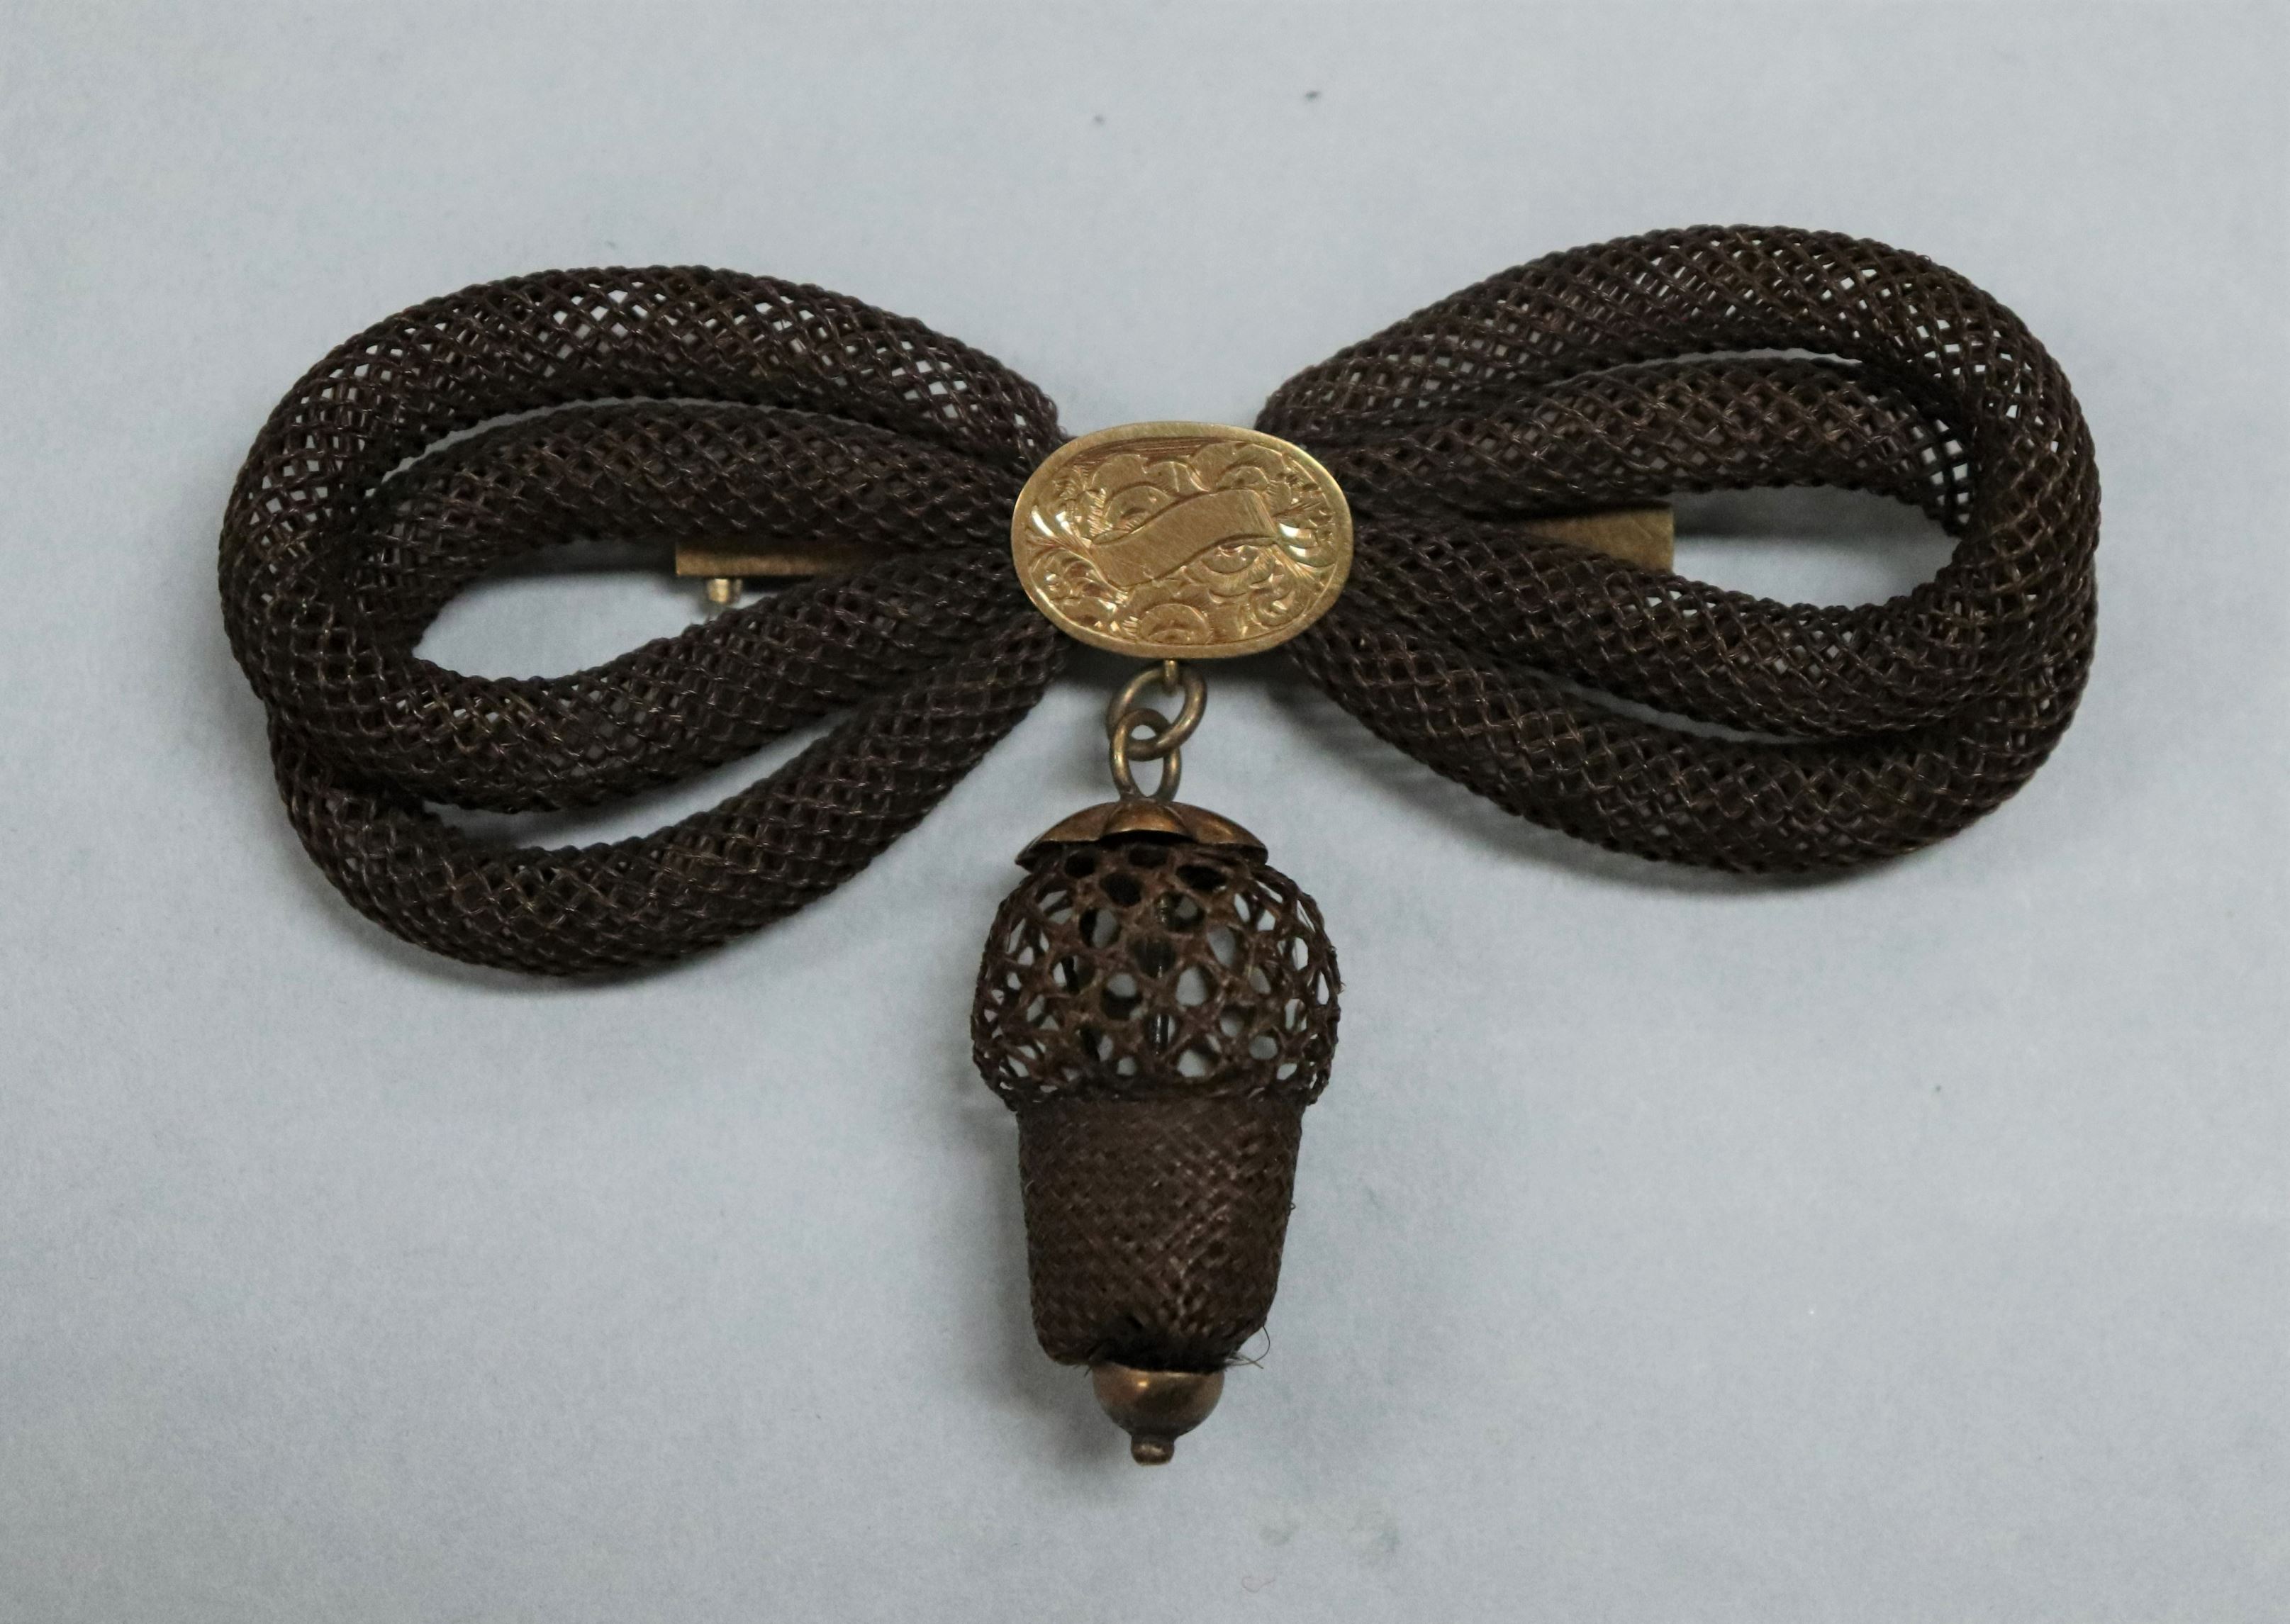 Tuesday Talk—Tokens of Love, Regard, and Loss: Looking at Hair Jewelry in the DAR Museum Collection